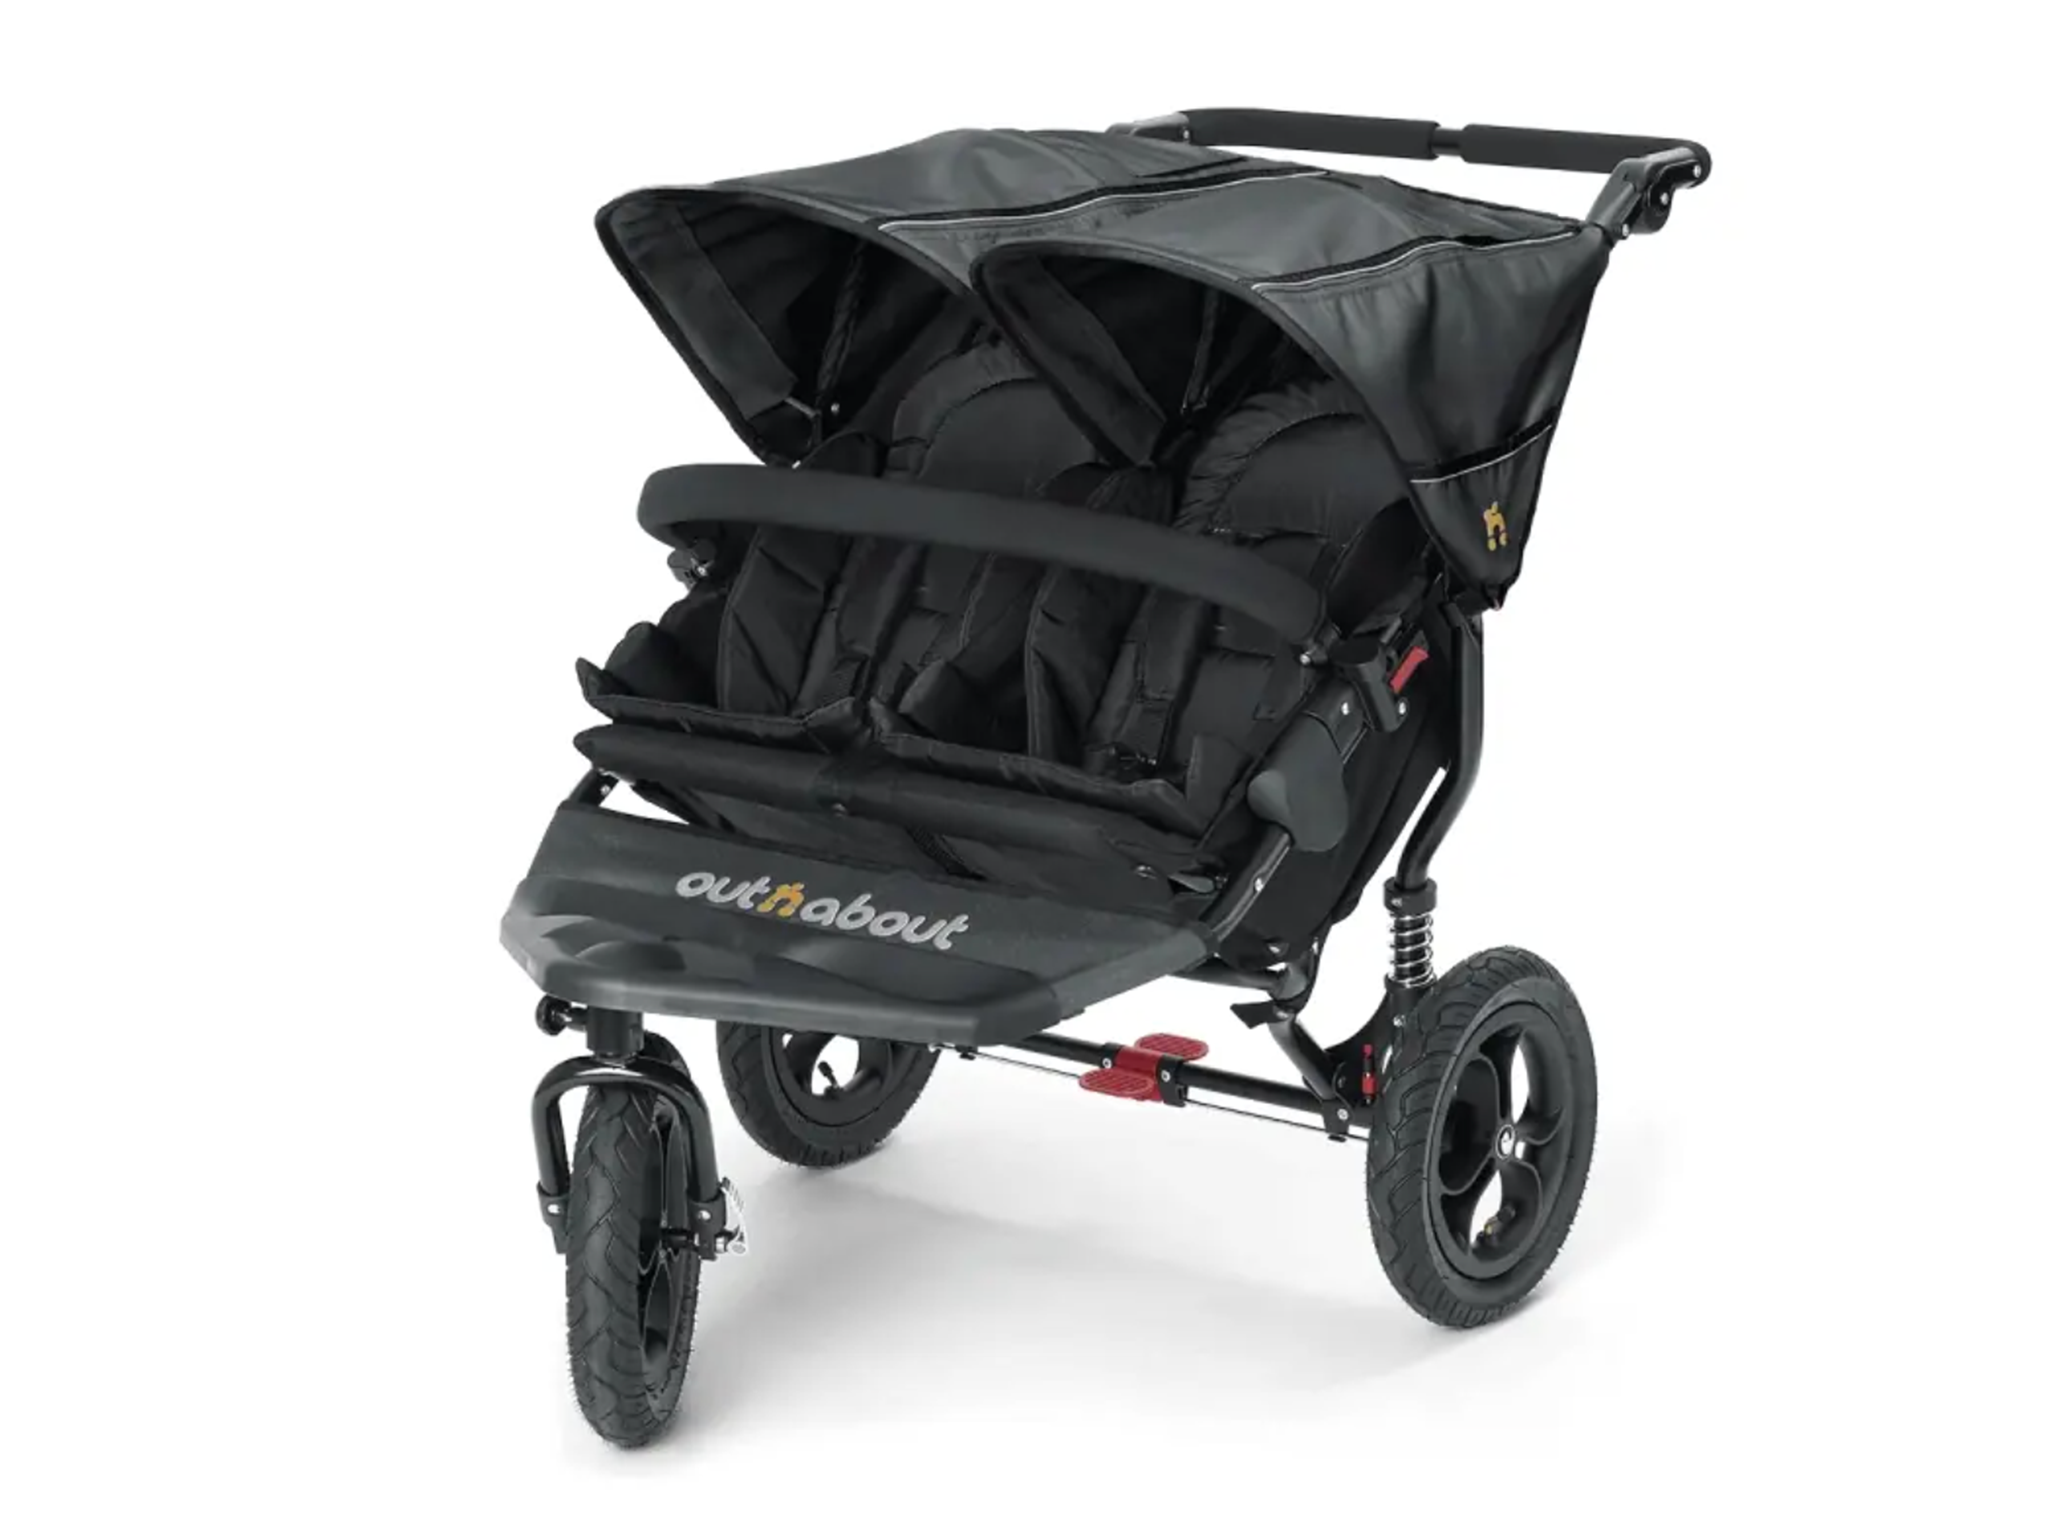 Outnabout-stroller-indybest